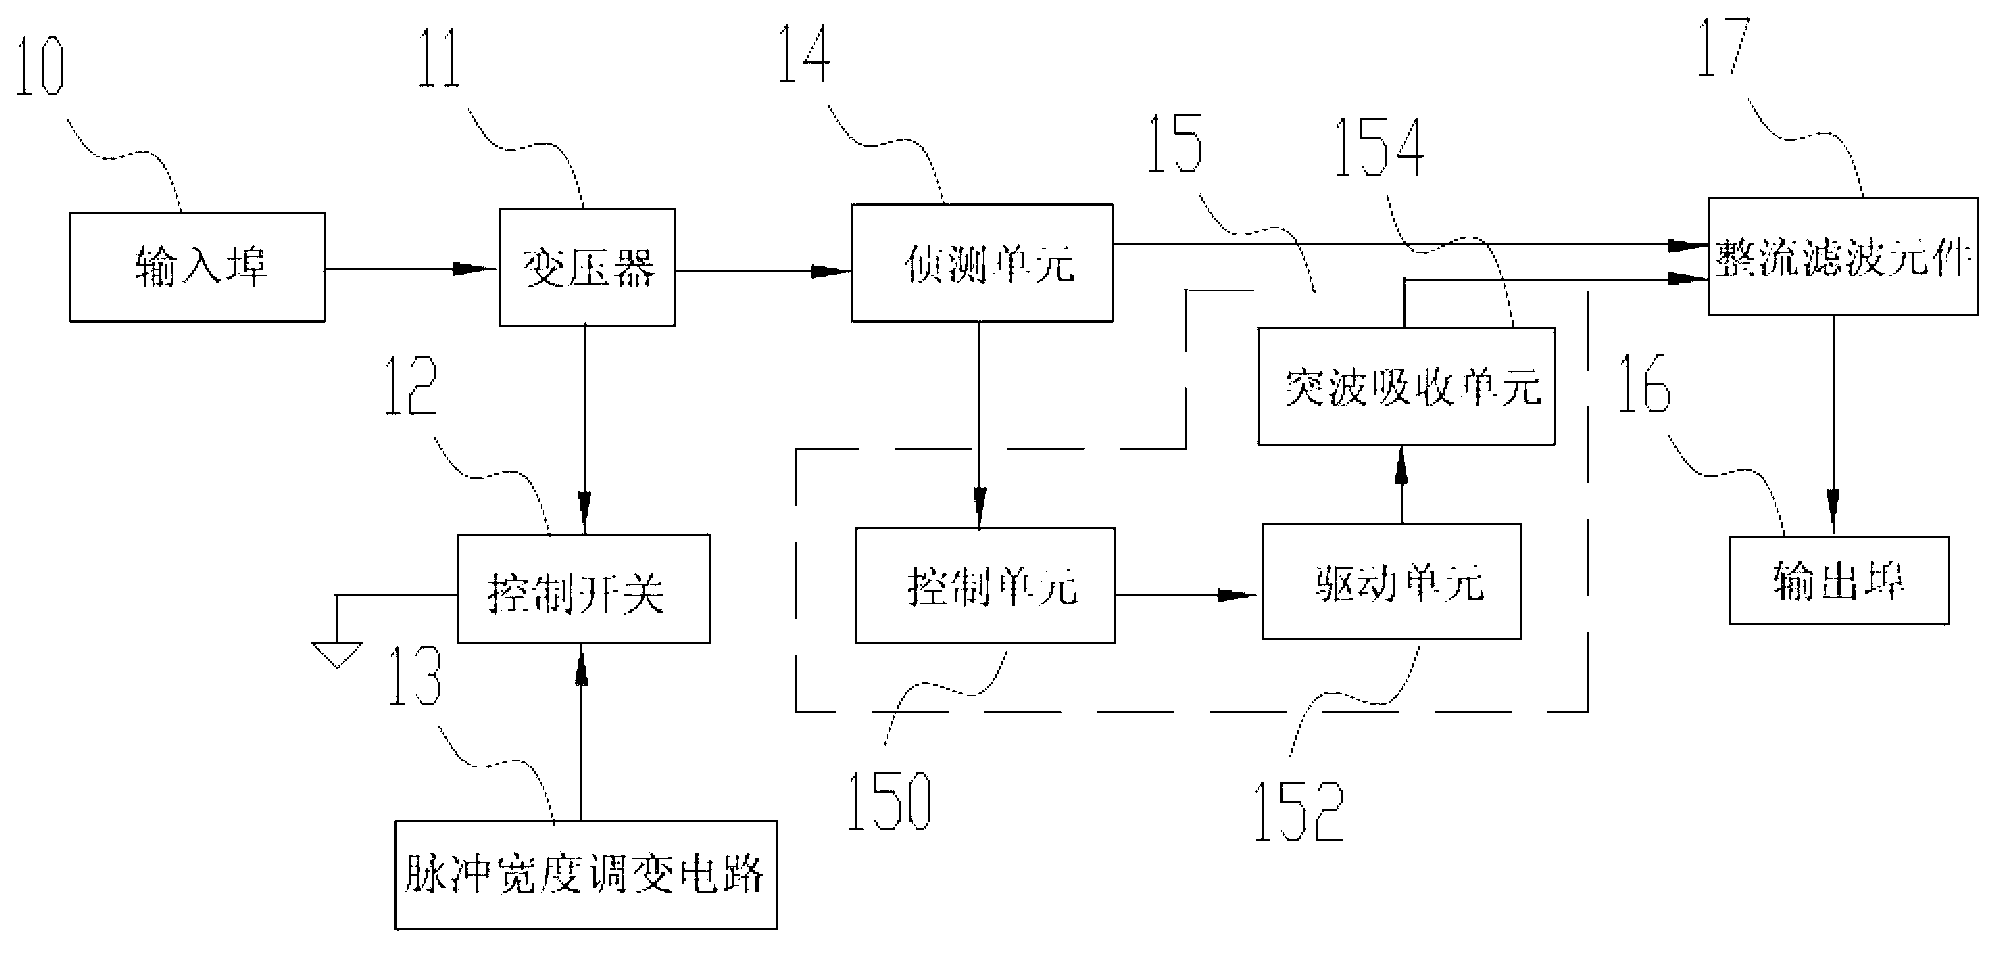 Power supply circuit with surge suppression function